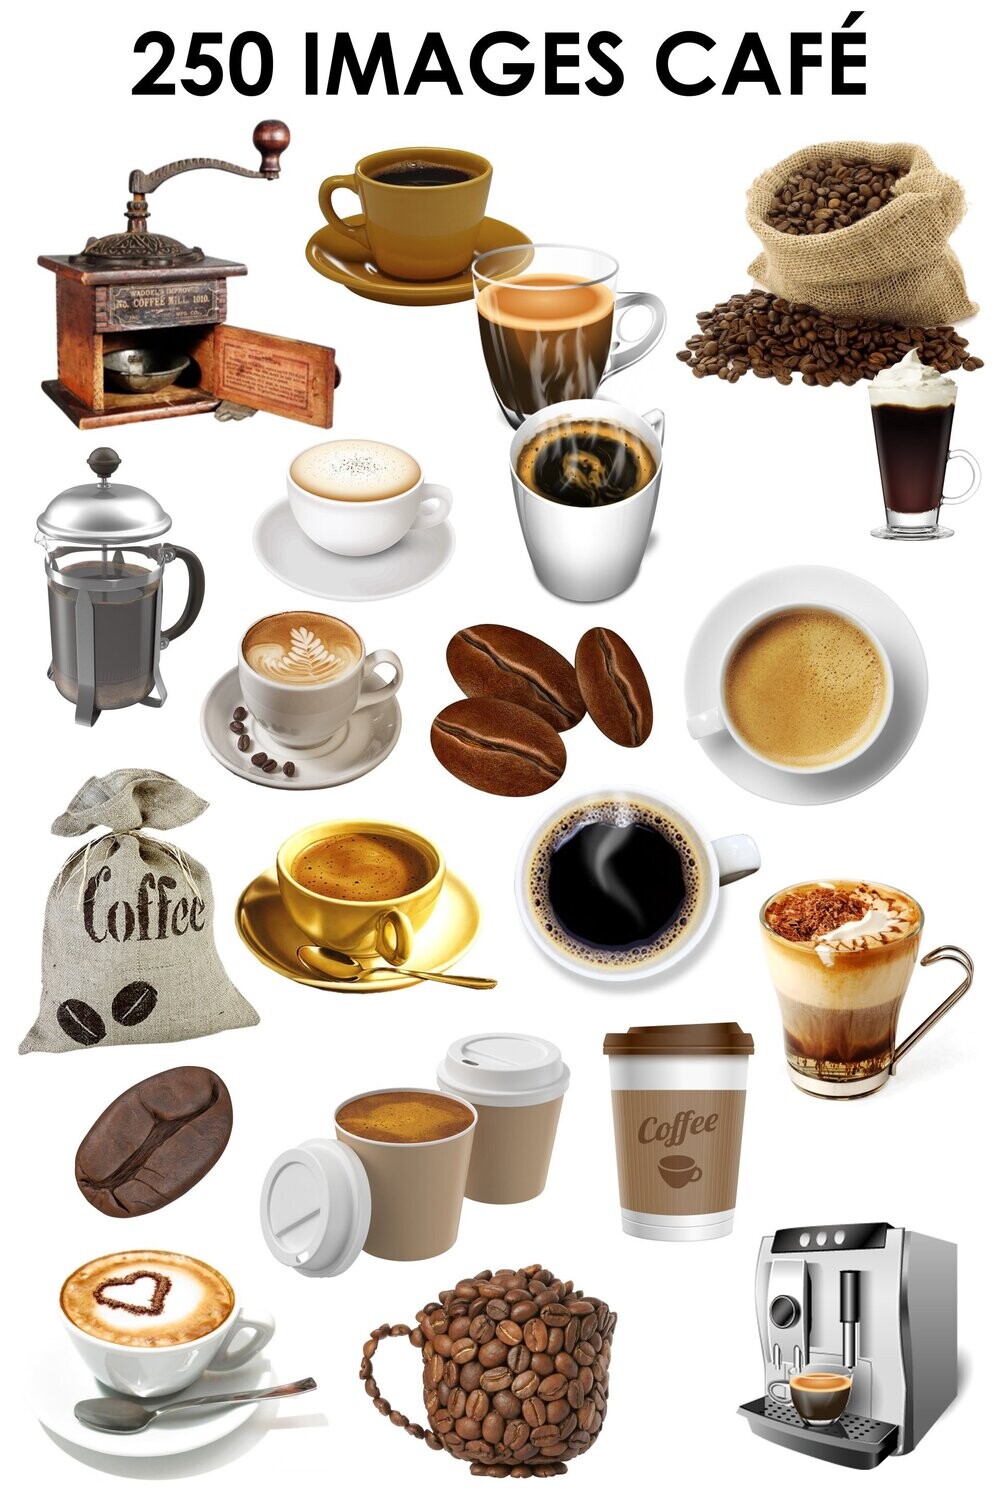 E. PACK CAFE 250 PNG